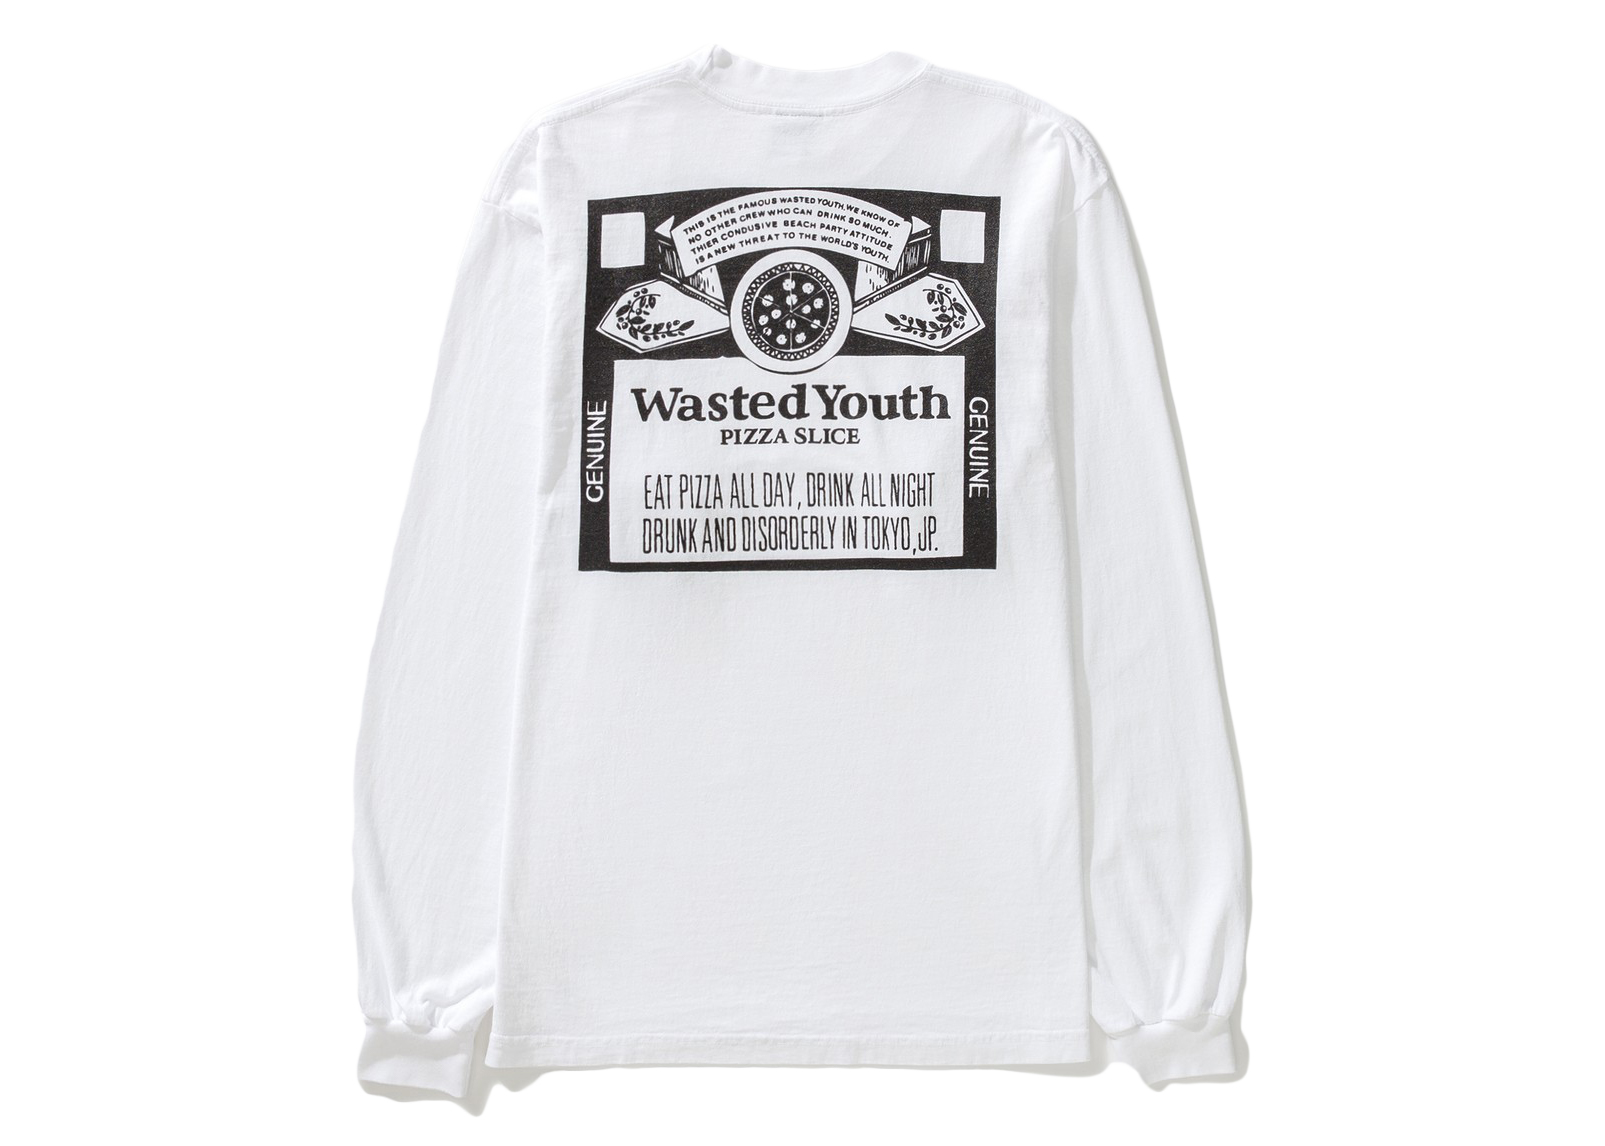 PIZZA SLICE Wasted Youth Tシャツ 白 Lサイズ-